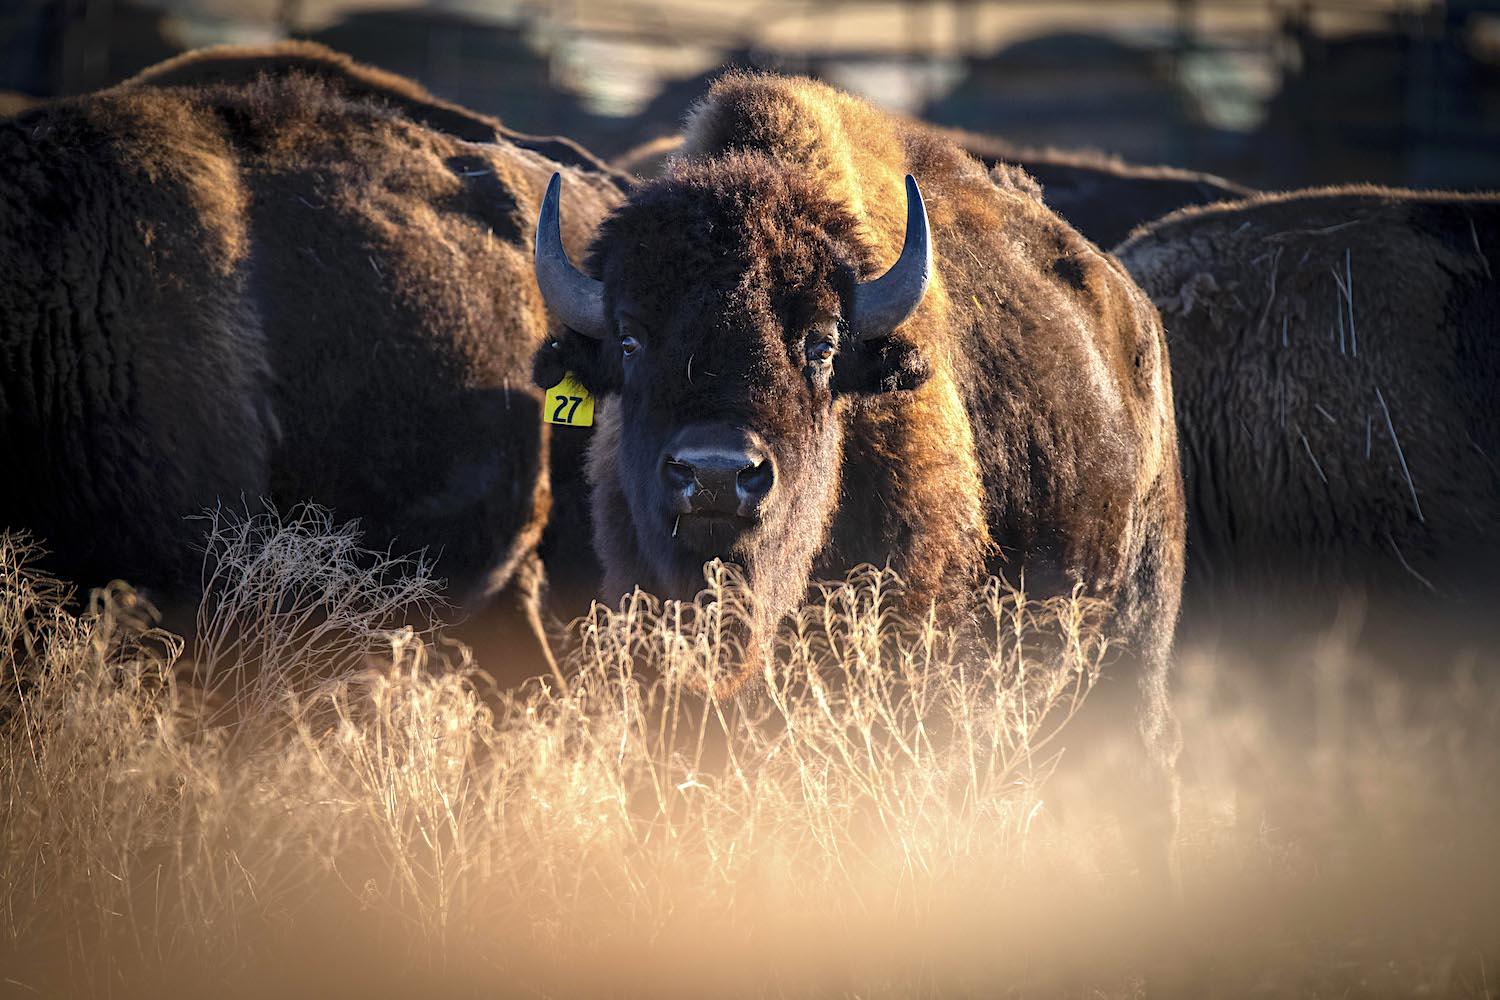 Saturday, November 7, 2020, is National Bison Day